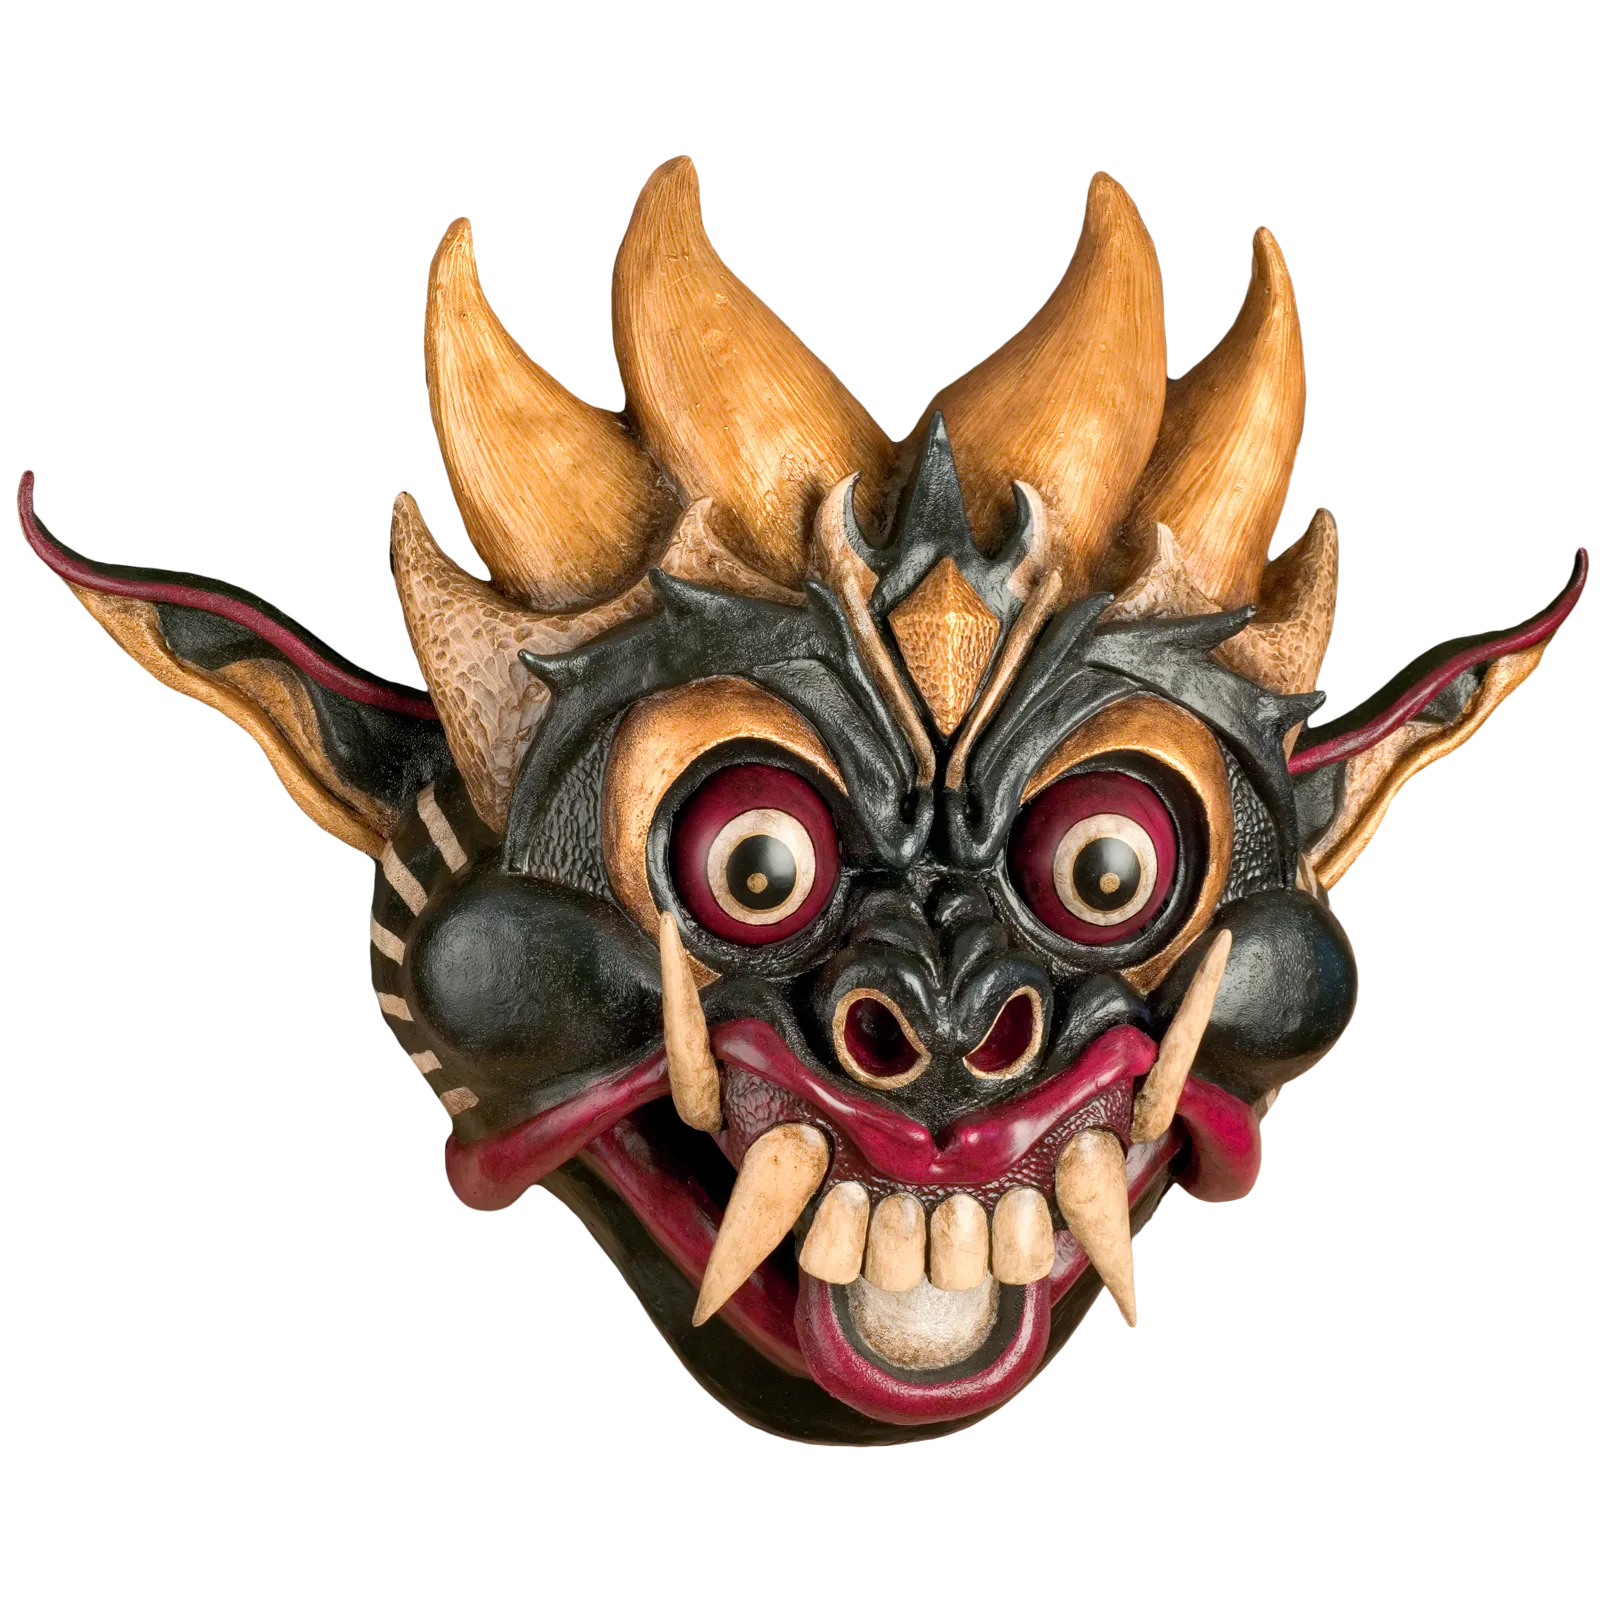 Fantasy figure head with large teeth and horns